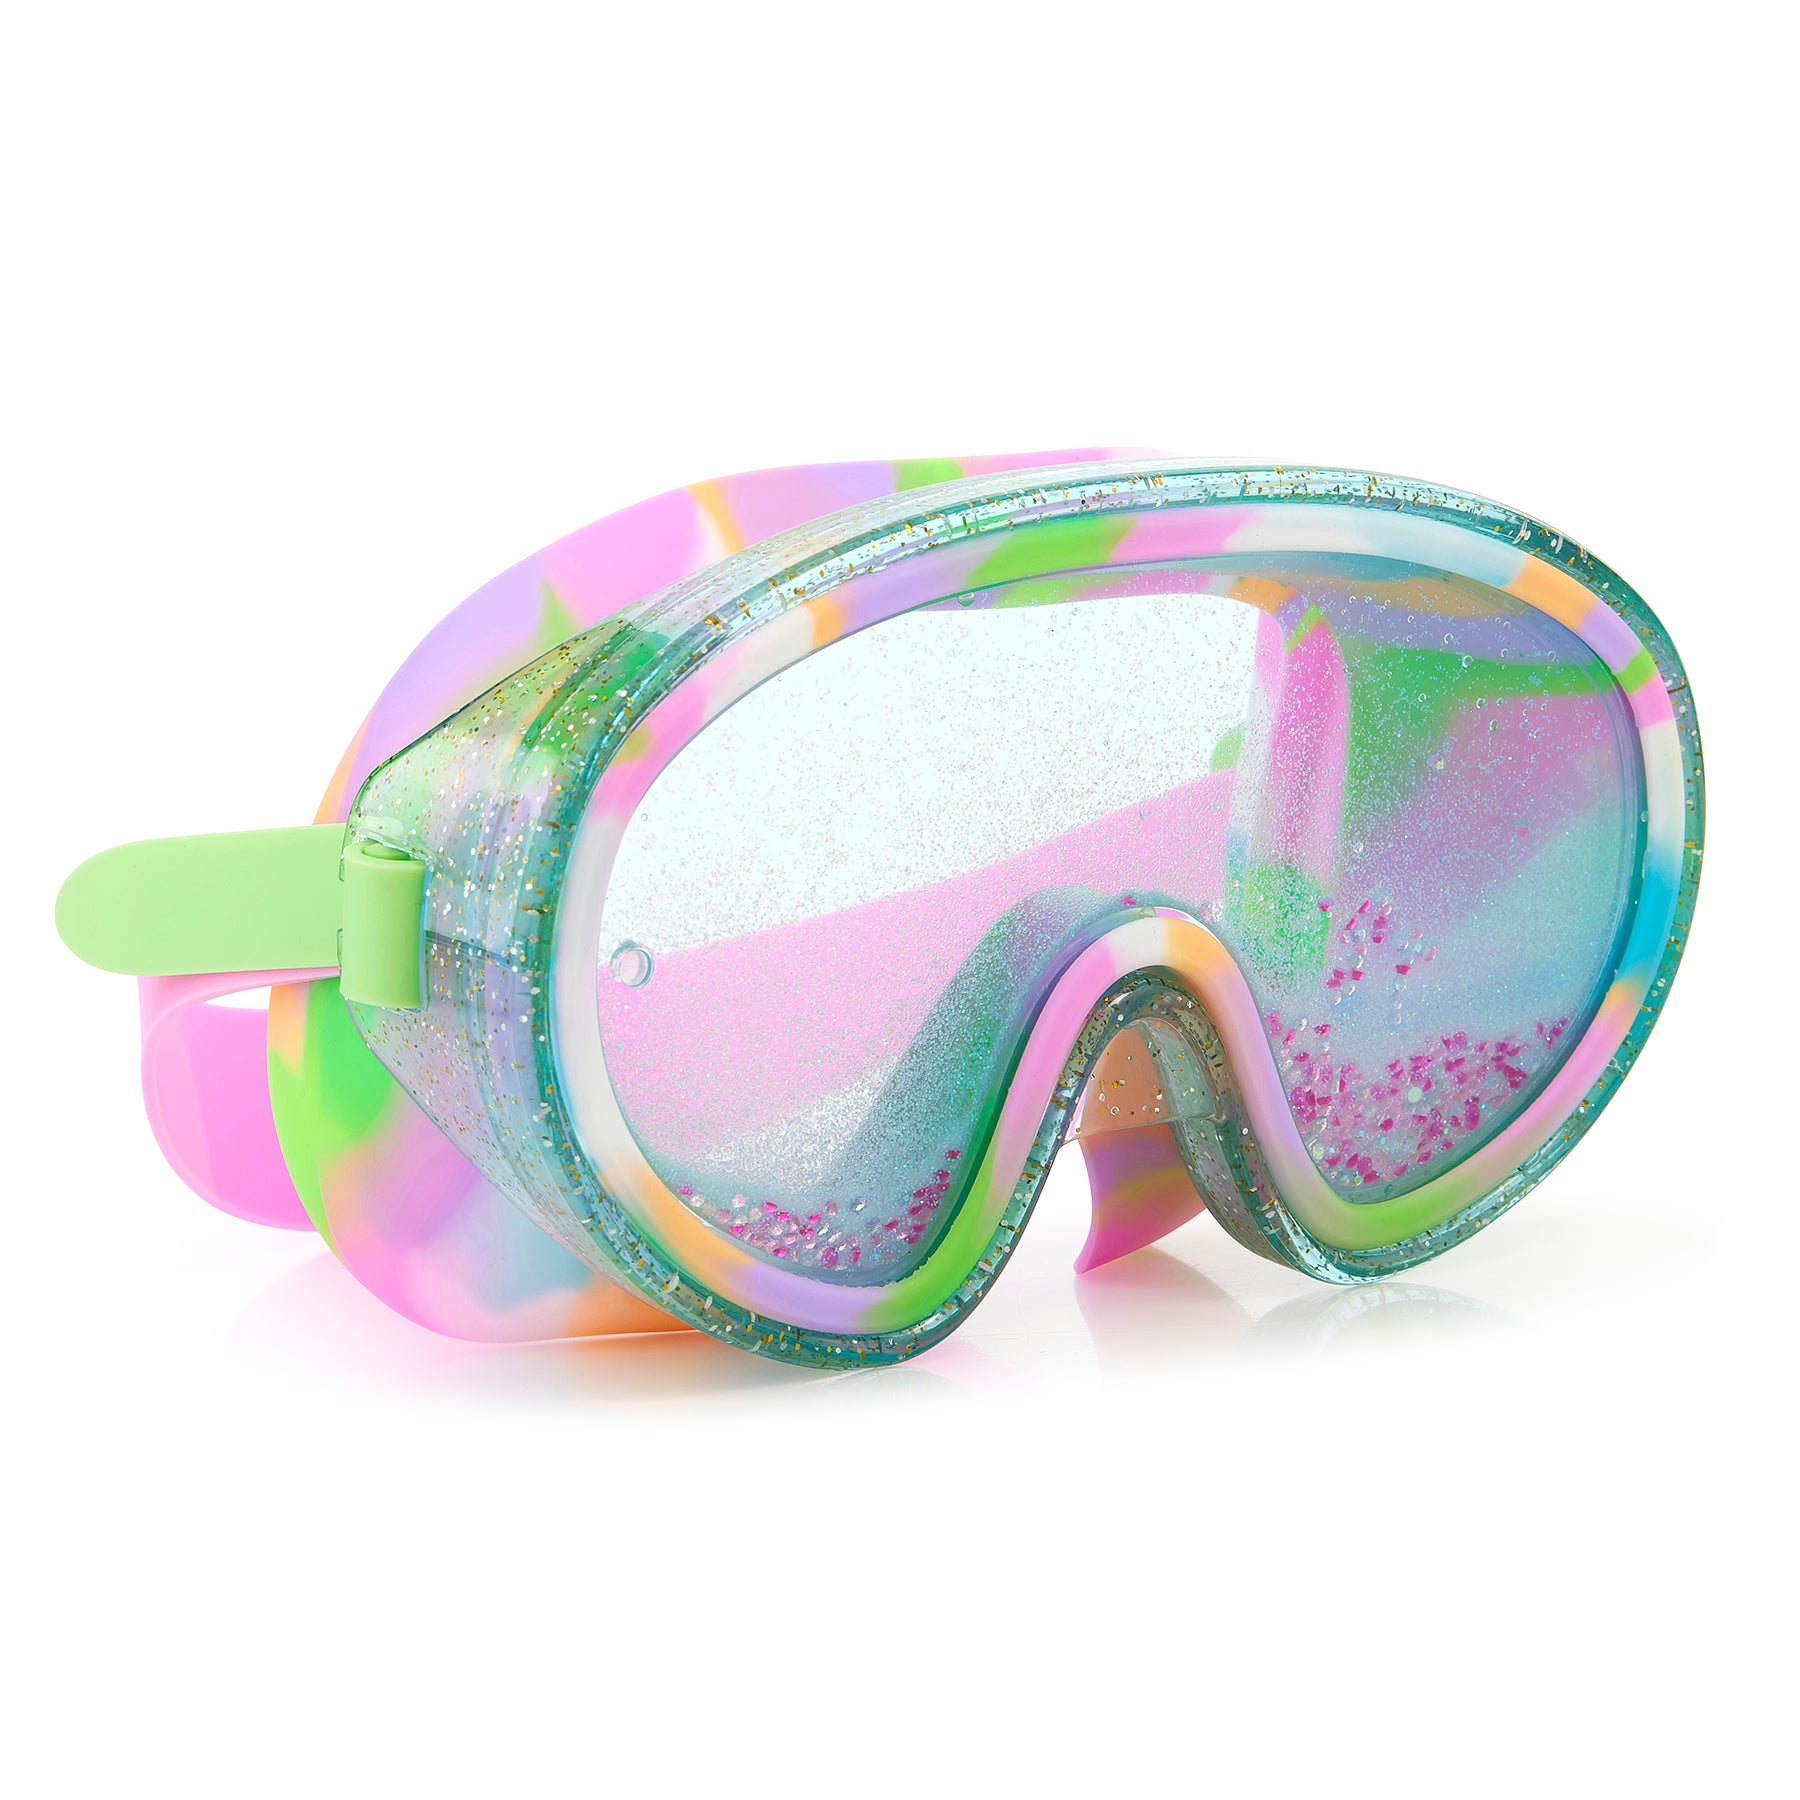 Bling2o Goggles Float N Away Gold Star Pastel